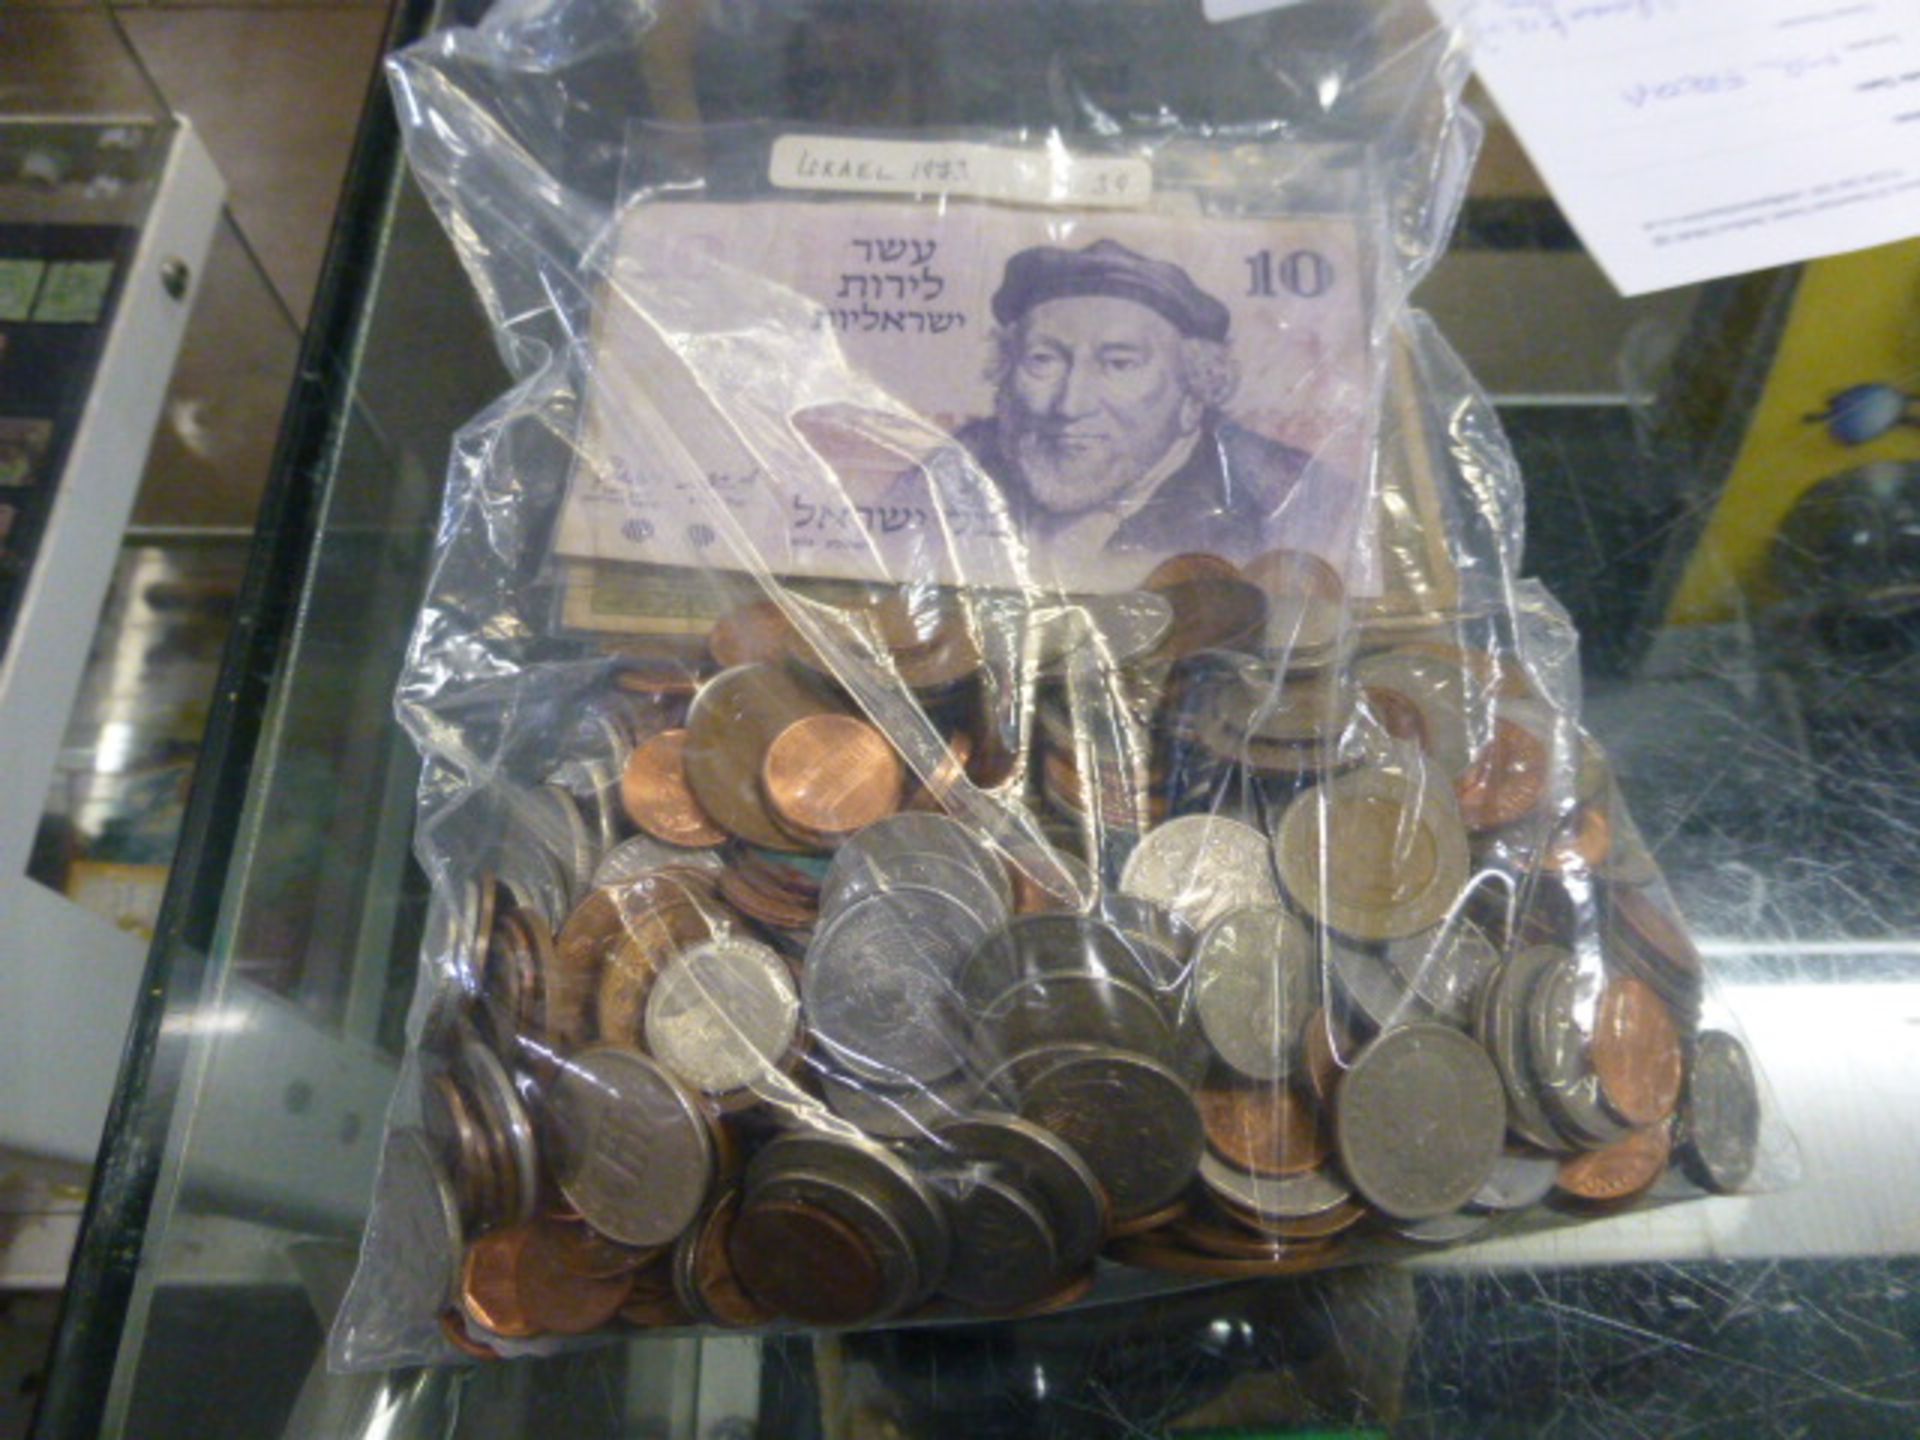 Bag of coins and bank notes